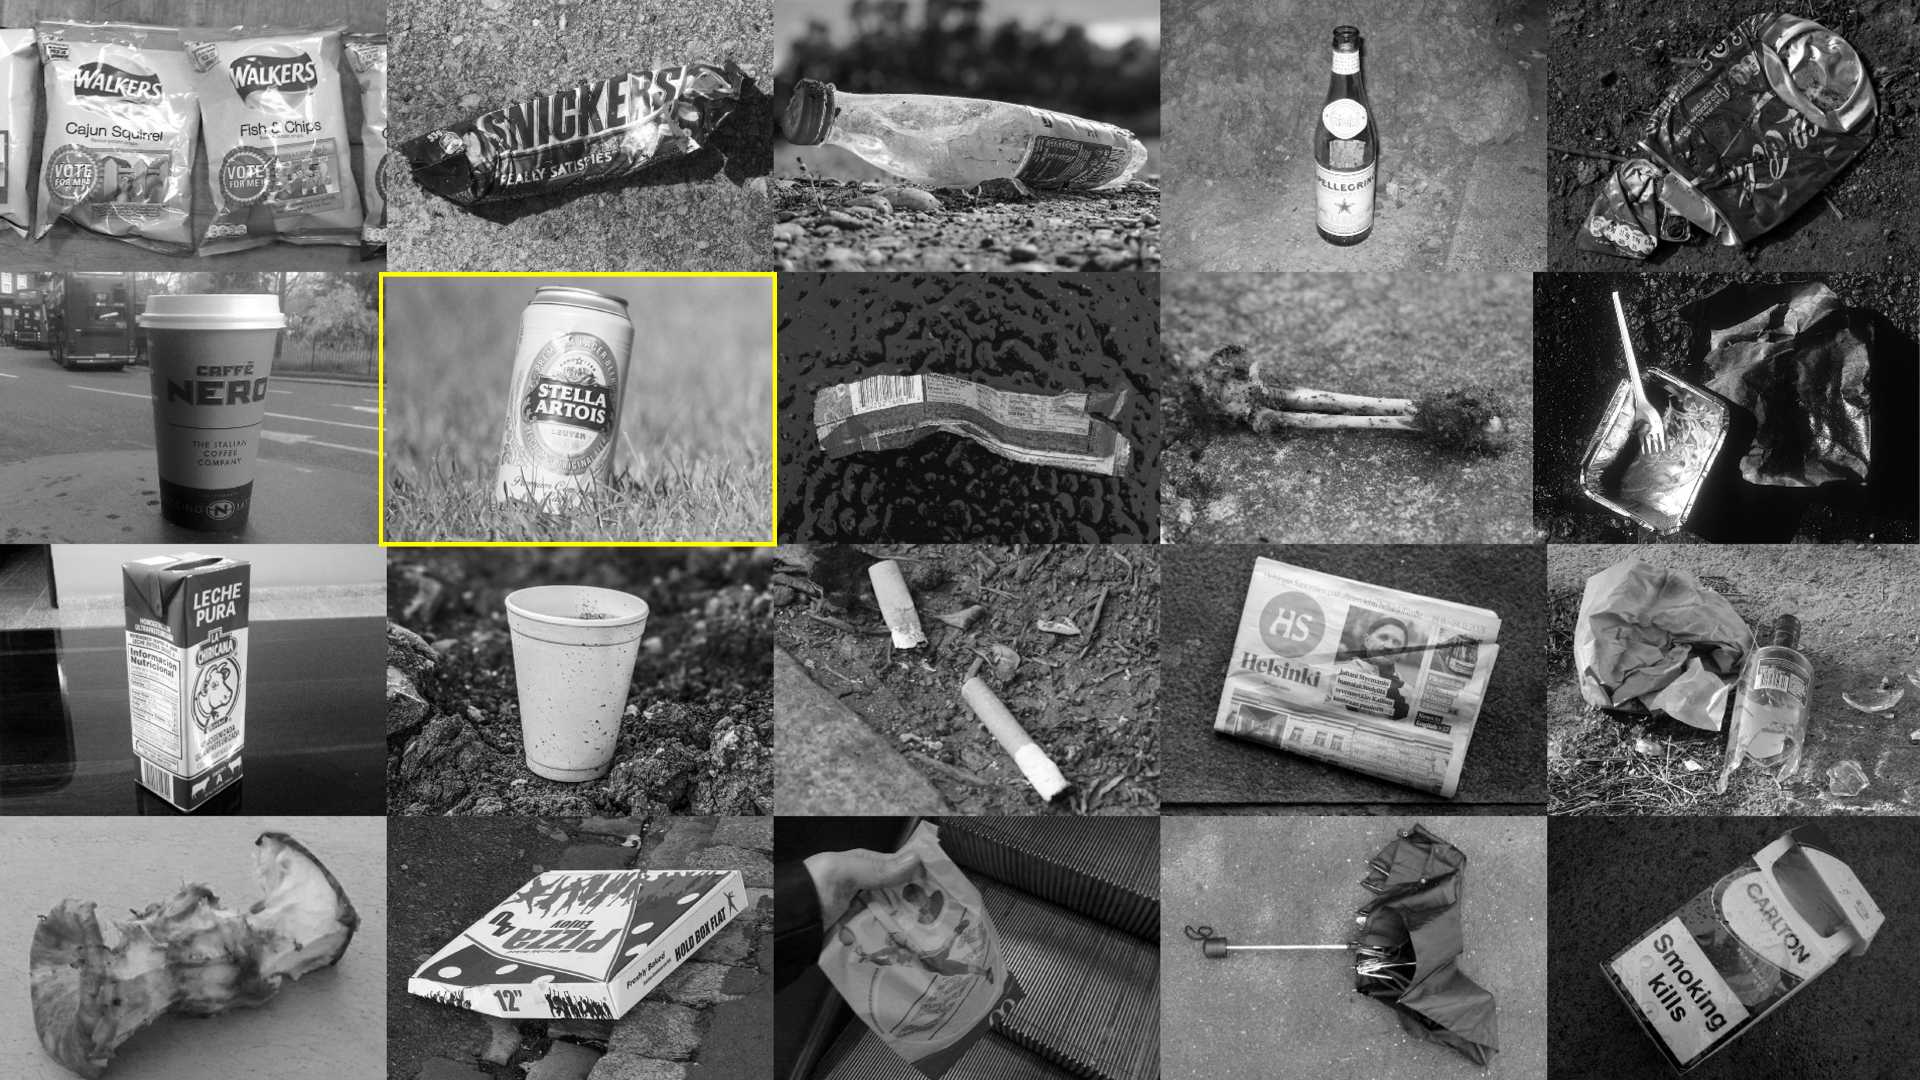 Used under CC BY 2.0:

“Walkers 5 trial crisp flavours" by Frankie Roberto
“Really Satisfies" by Frankie Roberto 
“C-_6667_sm-1" by Julian Stallabrass
“Close-up of an empty plastic milk bottle on the ground" by Ivan Radic
“Upscale Litter" by David Ashleydale
“High quality rubbish" by Colin Mutchler
“Rubbish" by Bruno Girin
“Leche" by Rich Young,
“White plastic cup on the ground" by Ivan Radic
“Cheeze I love cheeseburgers!" by Lauri Rantala
“712-21" by Julian Stallabrass
“Takeaway and Broken Booze" by Michael Coghlan
“News for the week" by Henry Söderlund
“Apple Core" by Ozzy Delaney
“Throw away pizza box" by crabchick
“Broken umbrella" by jon jordan
“Smoking kills" by Jeremy Segrott
“wrapper" by Paul Comstock

Used under CC BY-SA 2.0

“Cigarette Butts" by jstanley3
“Ants attacking a chicken bone" by Ozzy Delaney

All images cropped, desaturated, resampled and recoloured from original.